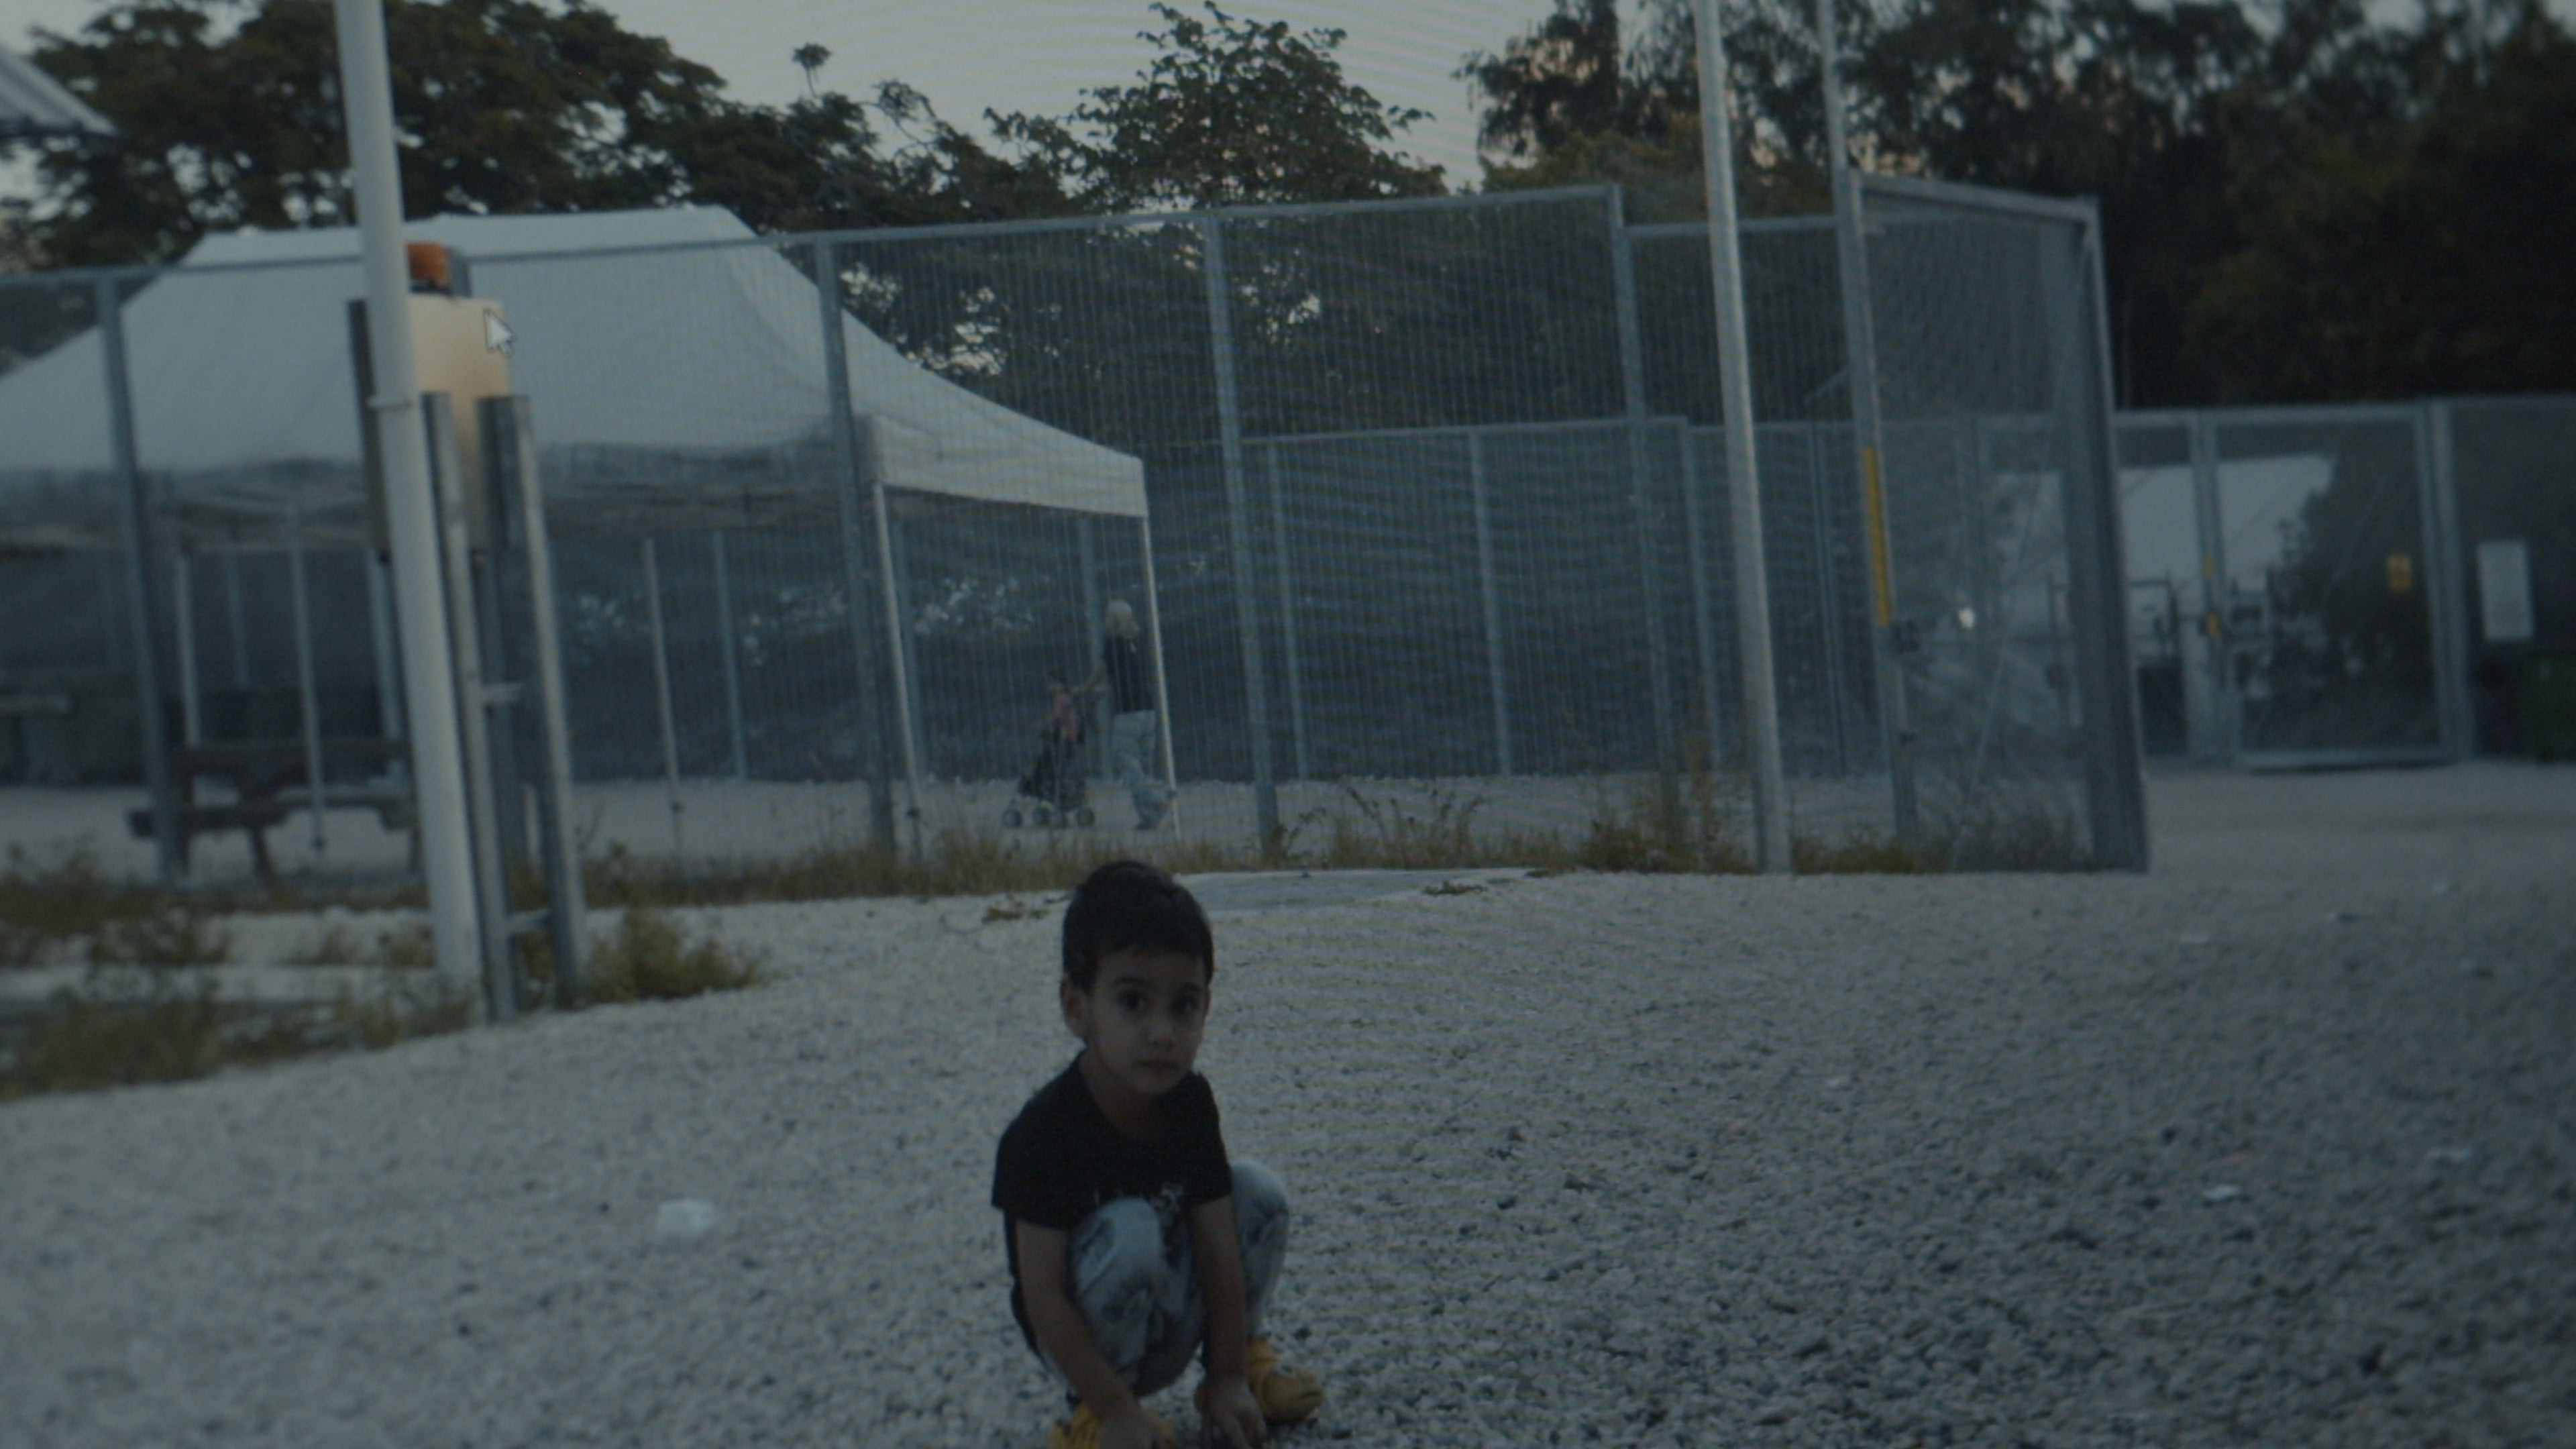 A rare image captured of a child in Nauru detention centre, where cameras are scarce